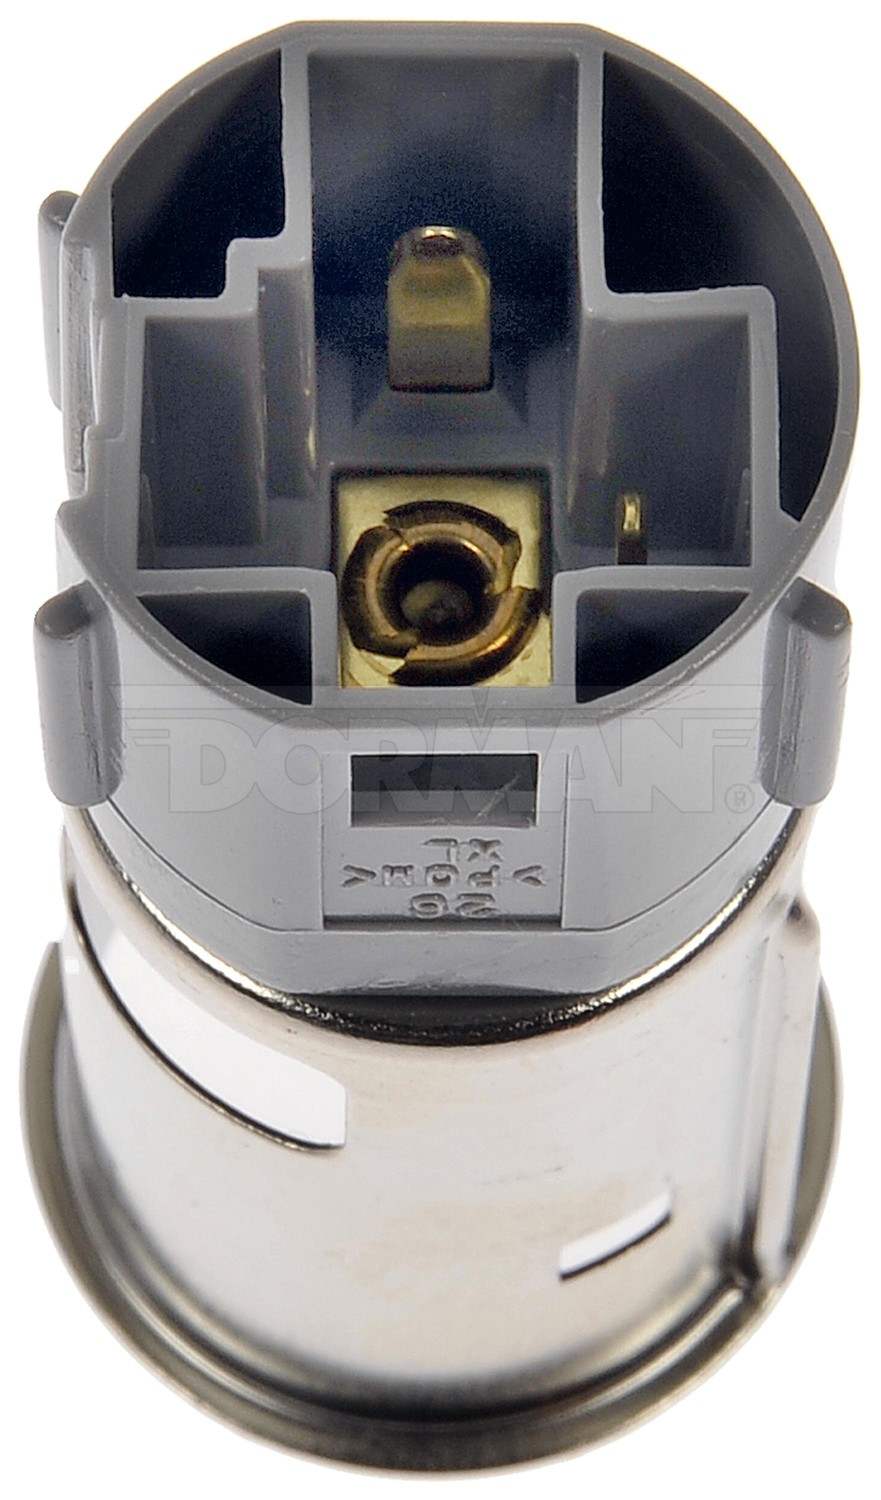 Front View of 12 Volt Accessory Power Outlet Socket DORMAN 926-331